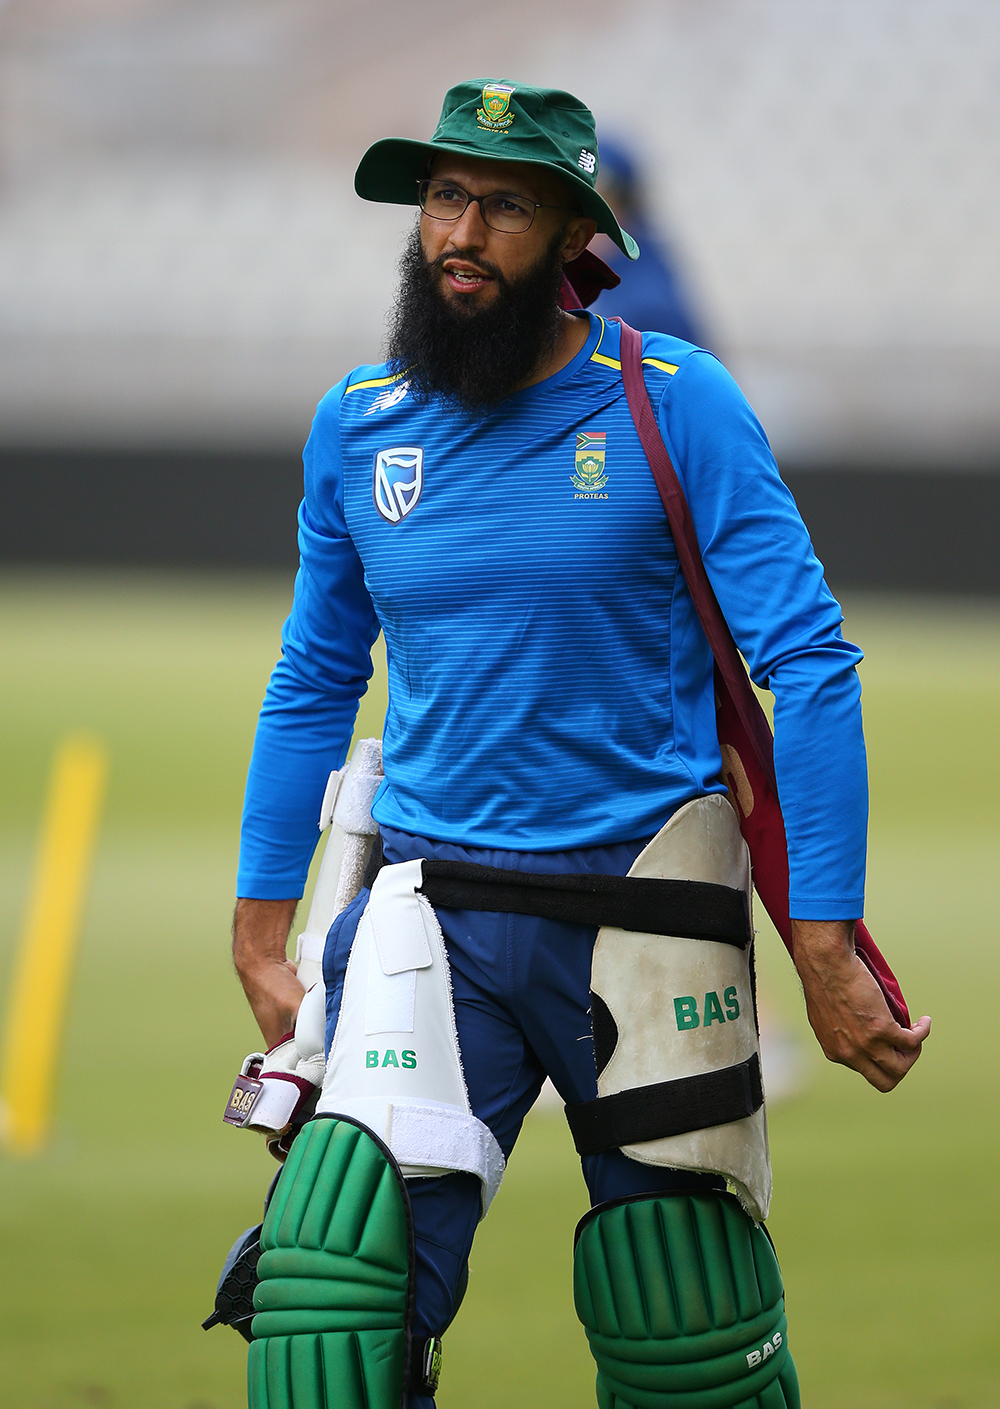 Happy 37th Birthday to Hashim Amla!

124 Tests
181 ODIs
44 T20Is

What a legend!  